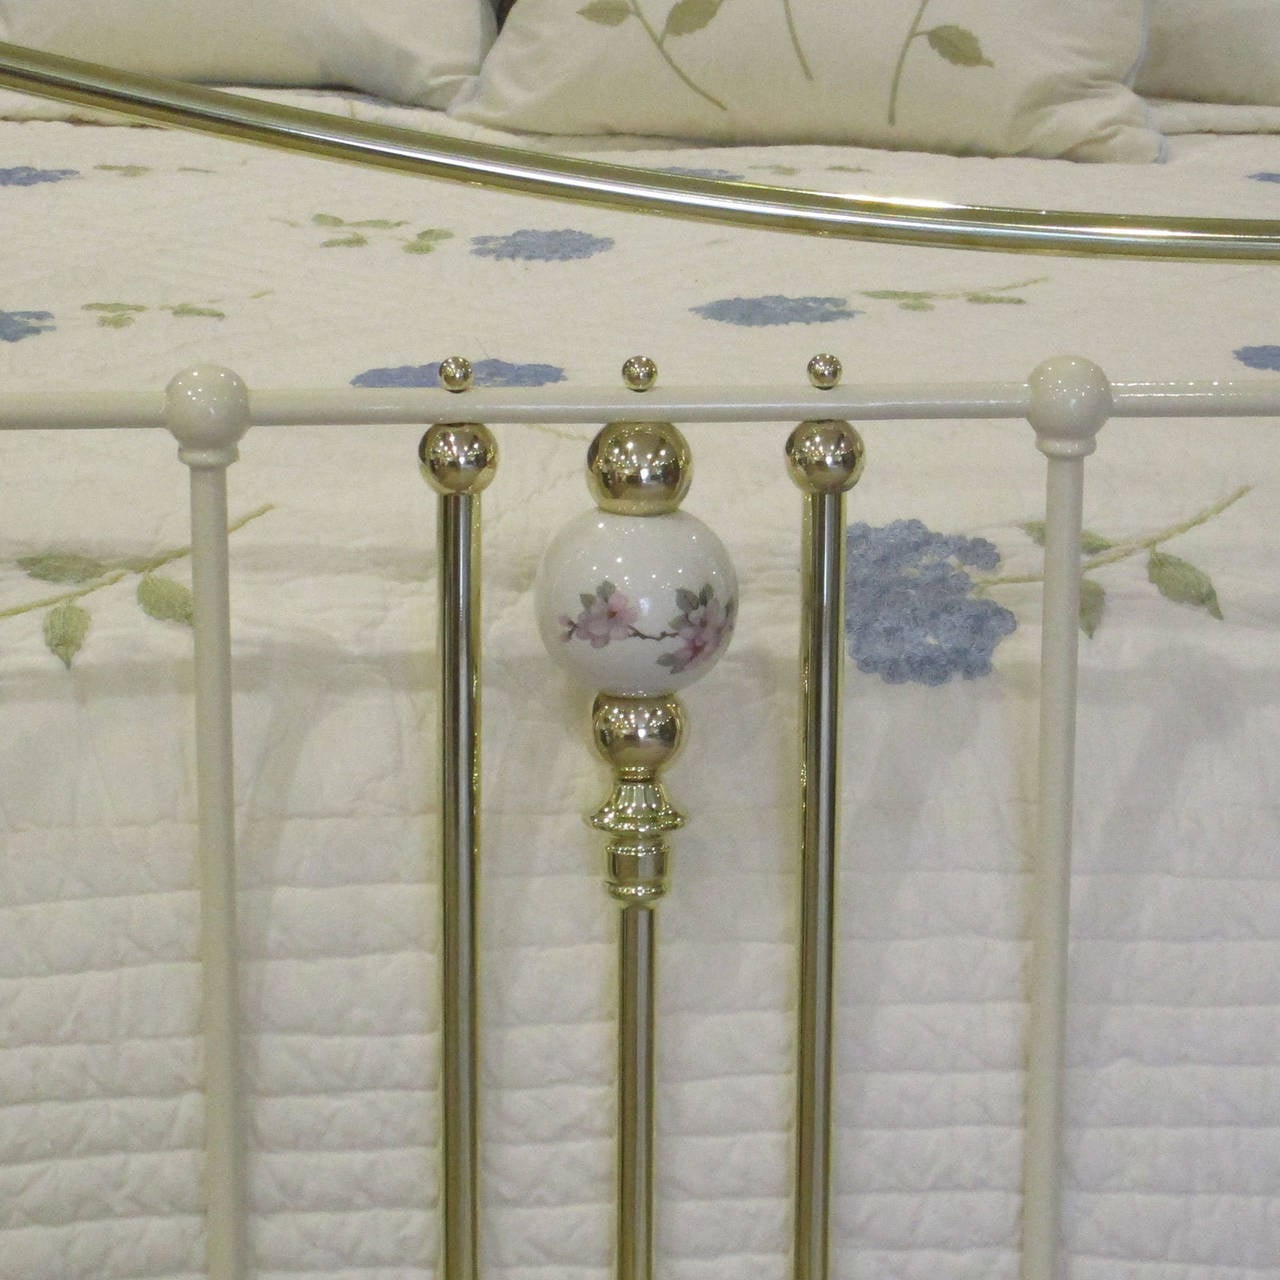 brass headboard with porcelain knobs